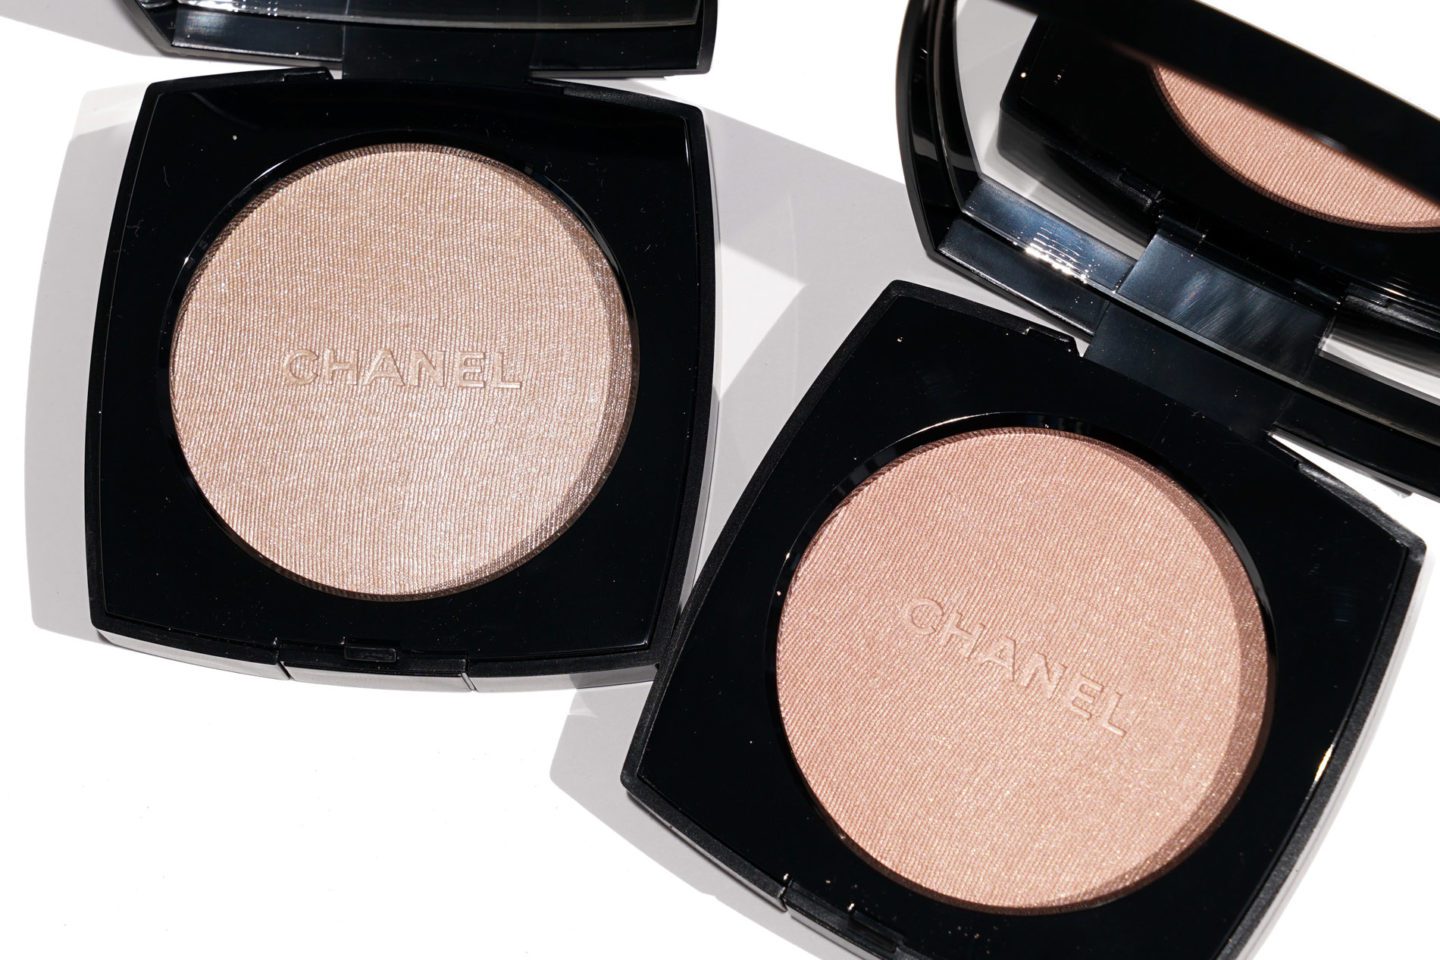 Chanel Poudre Lumiere Highlighting Powders - Ivory Gold and Rosy Gold